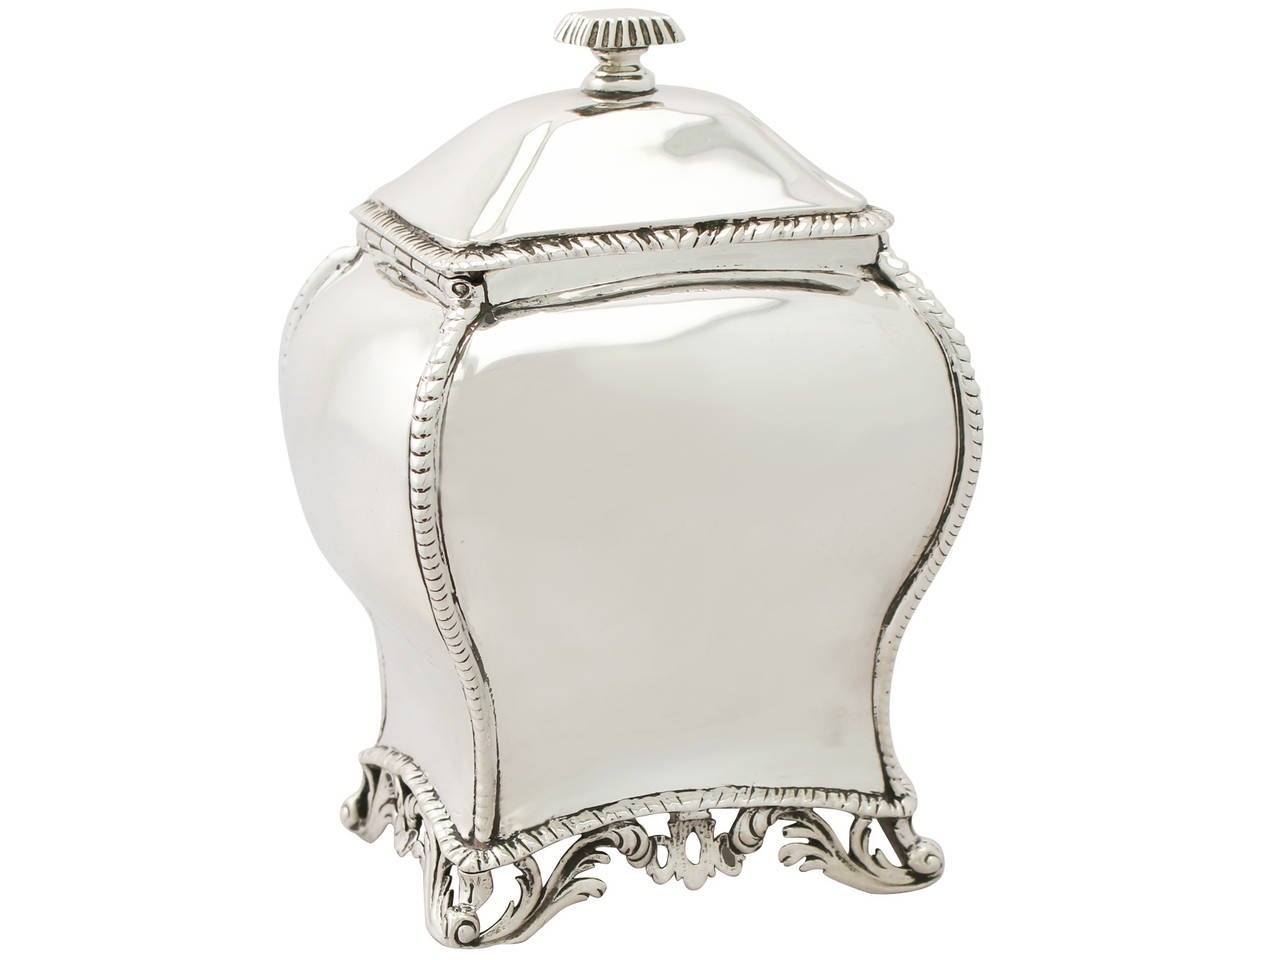 A fine and impressive, antique Georgian English sterling silver tea caddy in the Regency style; an addition to our silver teaware collection.

This fine antique George III sterling silver tea caddy has a plain Regency style bombe shaped